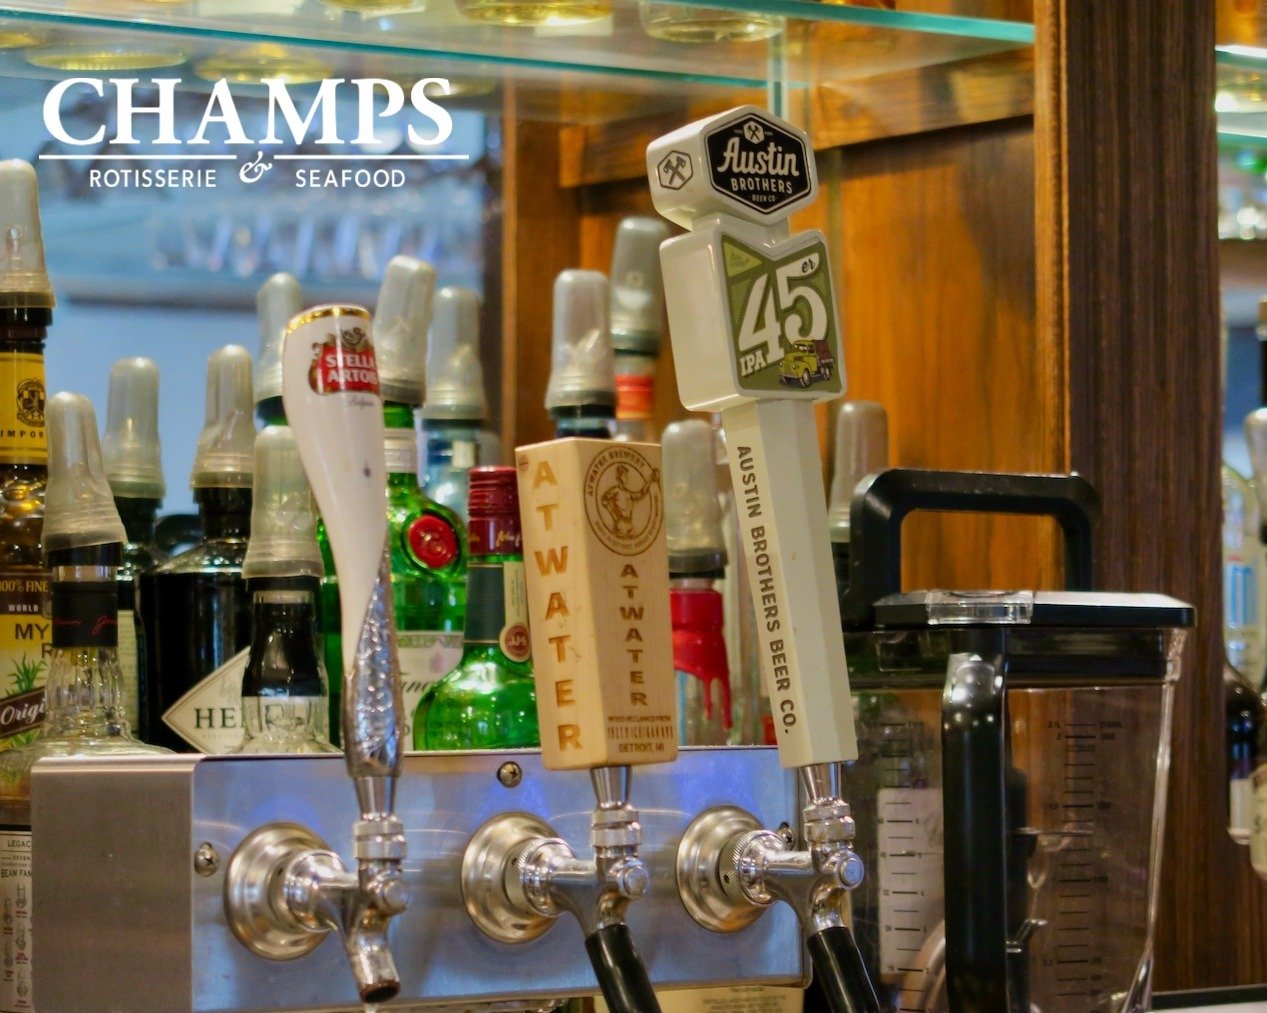 Champs features a full bar, rotating taps, and a wide selection of liquors and wines!